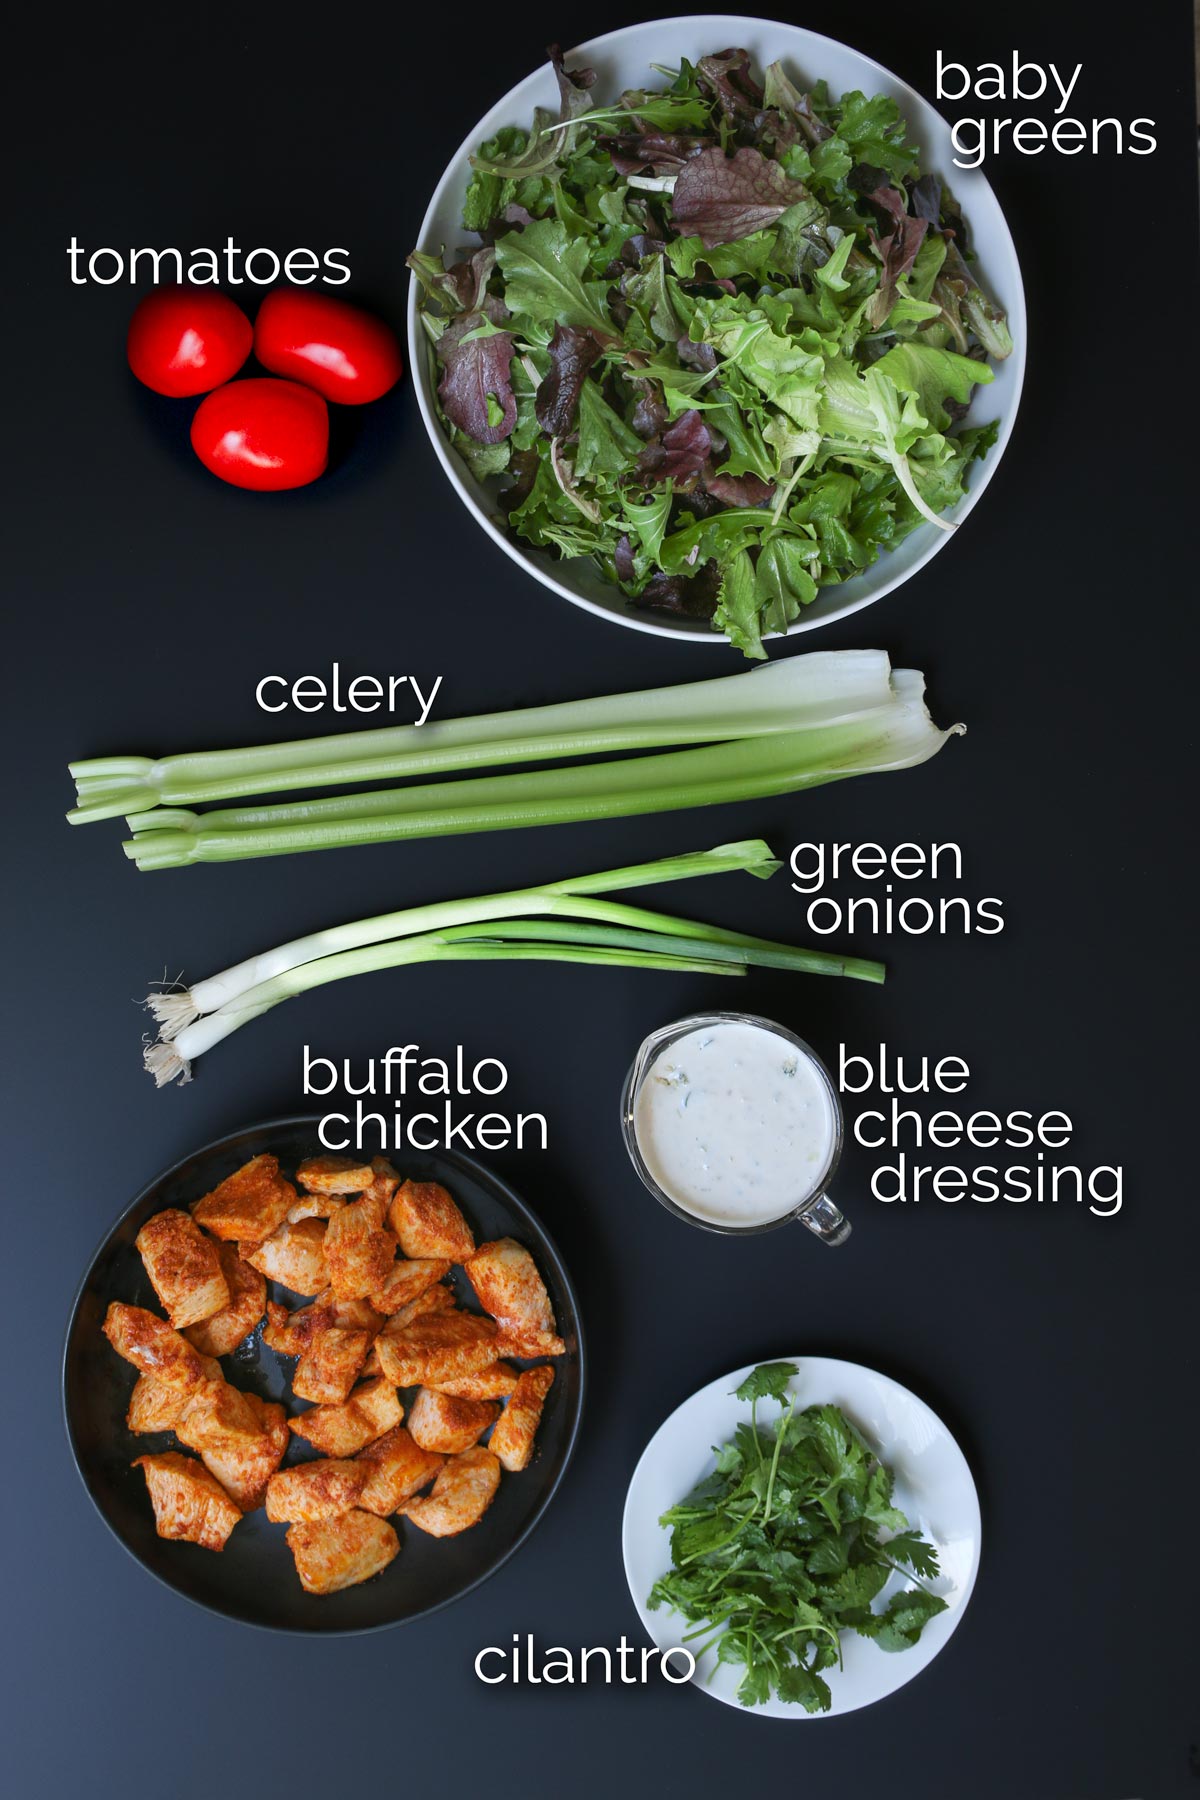 ingredients for buffalo chicken salad laid out on black table.